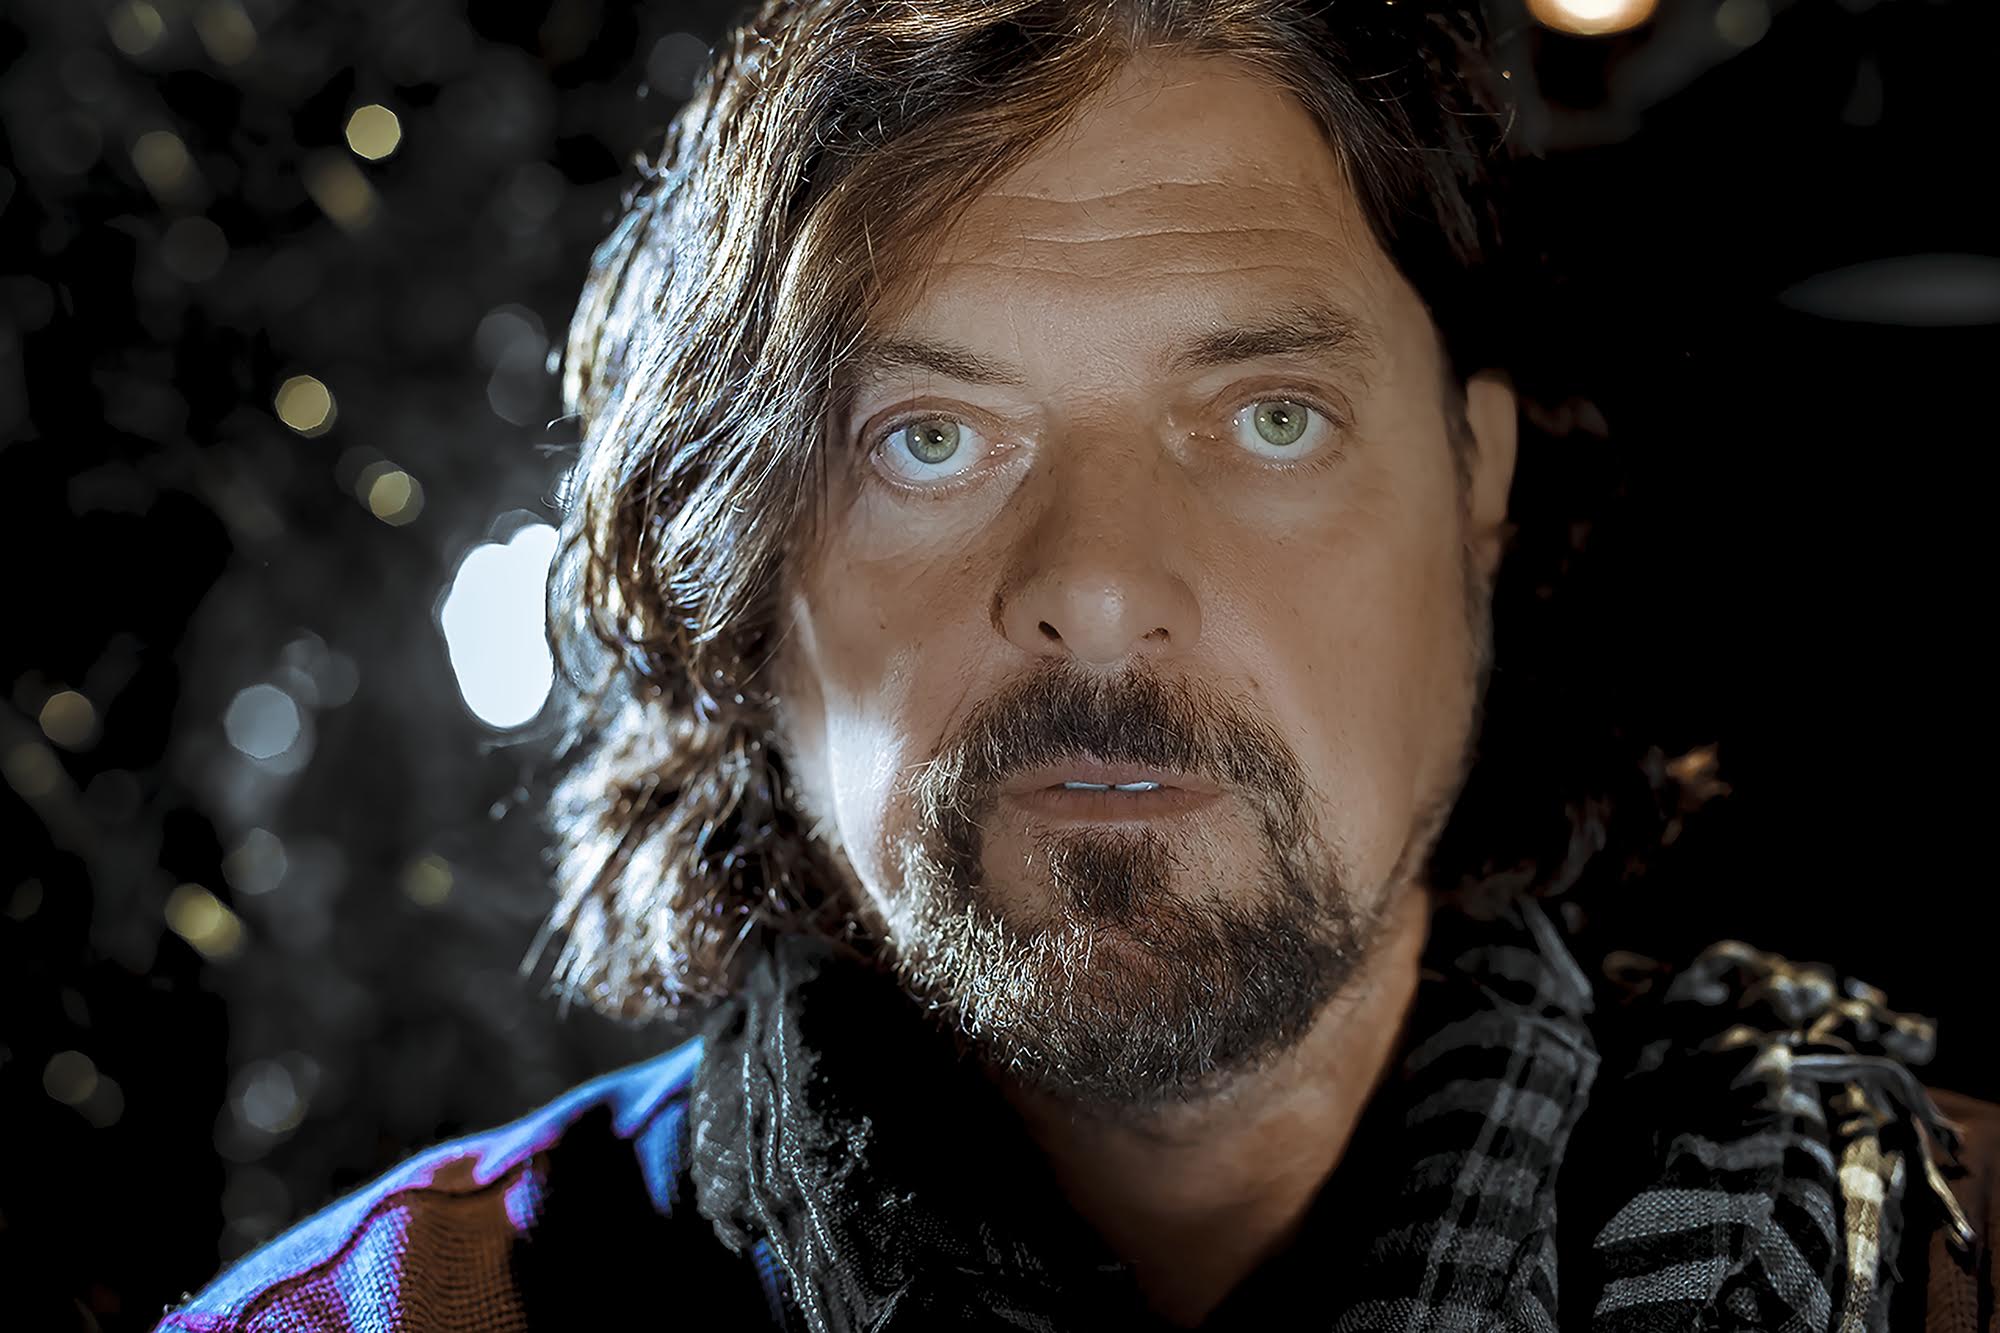 Alan Parsons Live Project to play Jan. 26